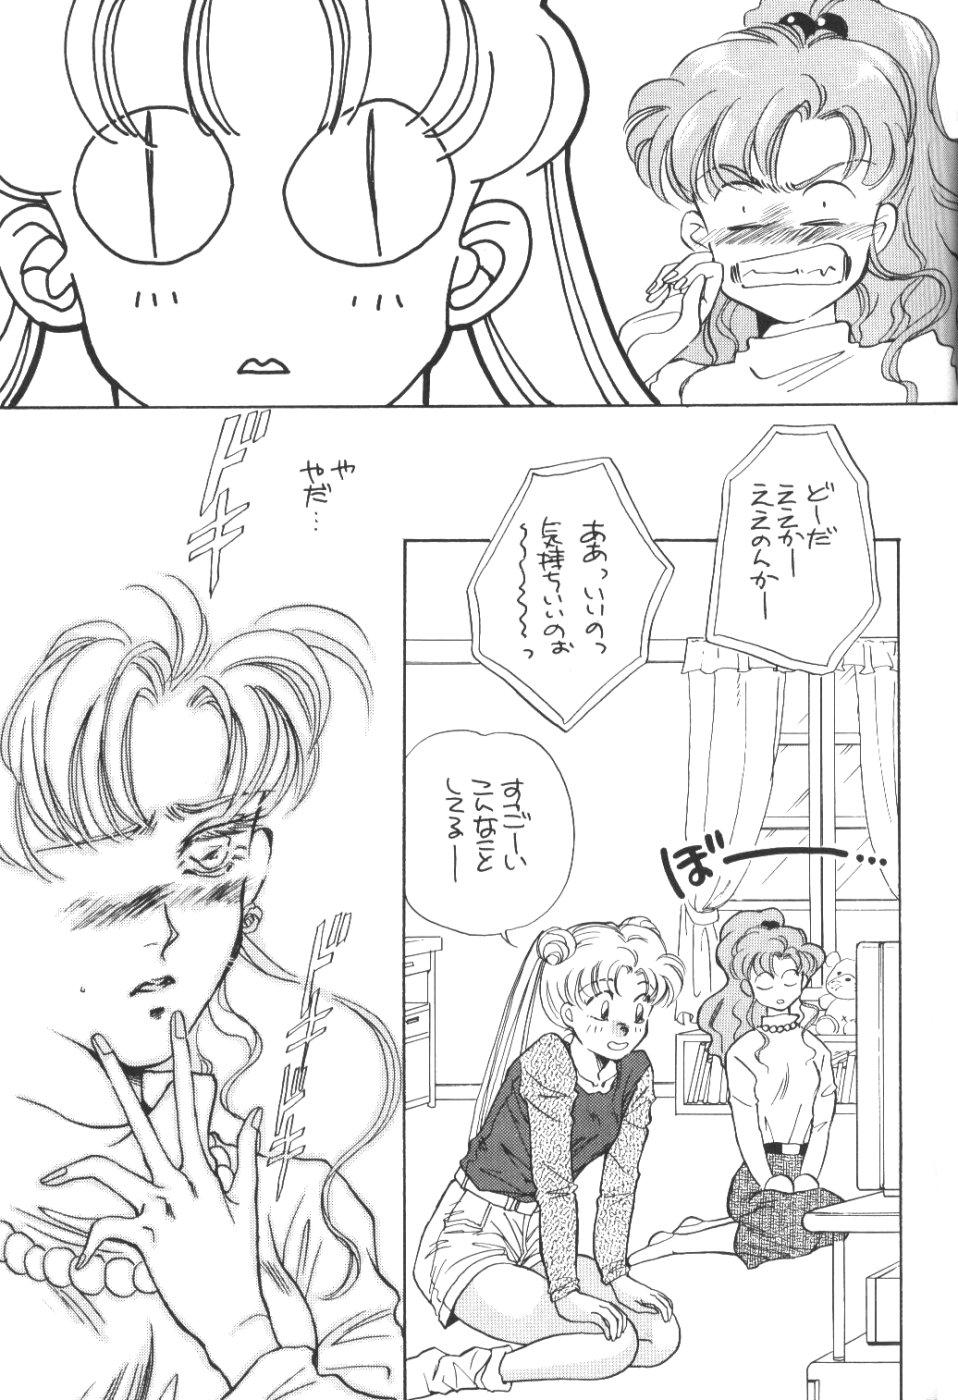 Topless Paradise Army - Sailor moon Van - Page 10